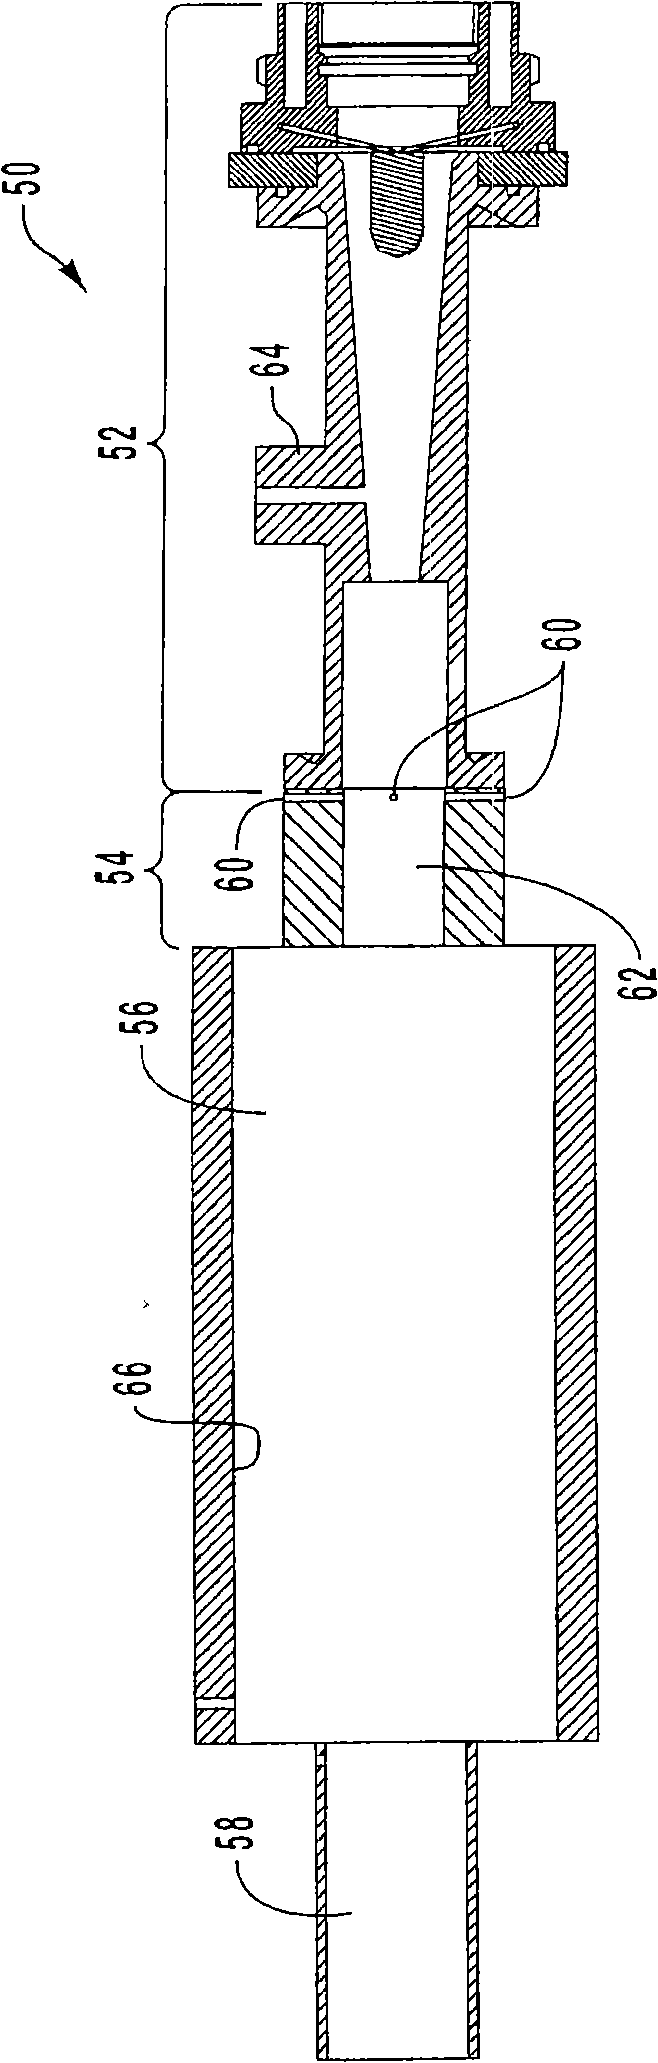 Thermosynthesis device